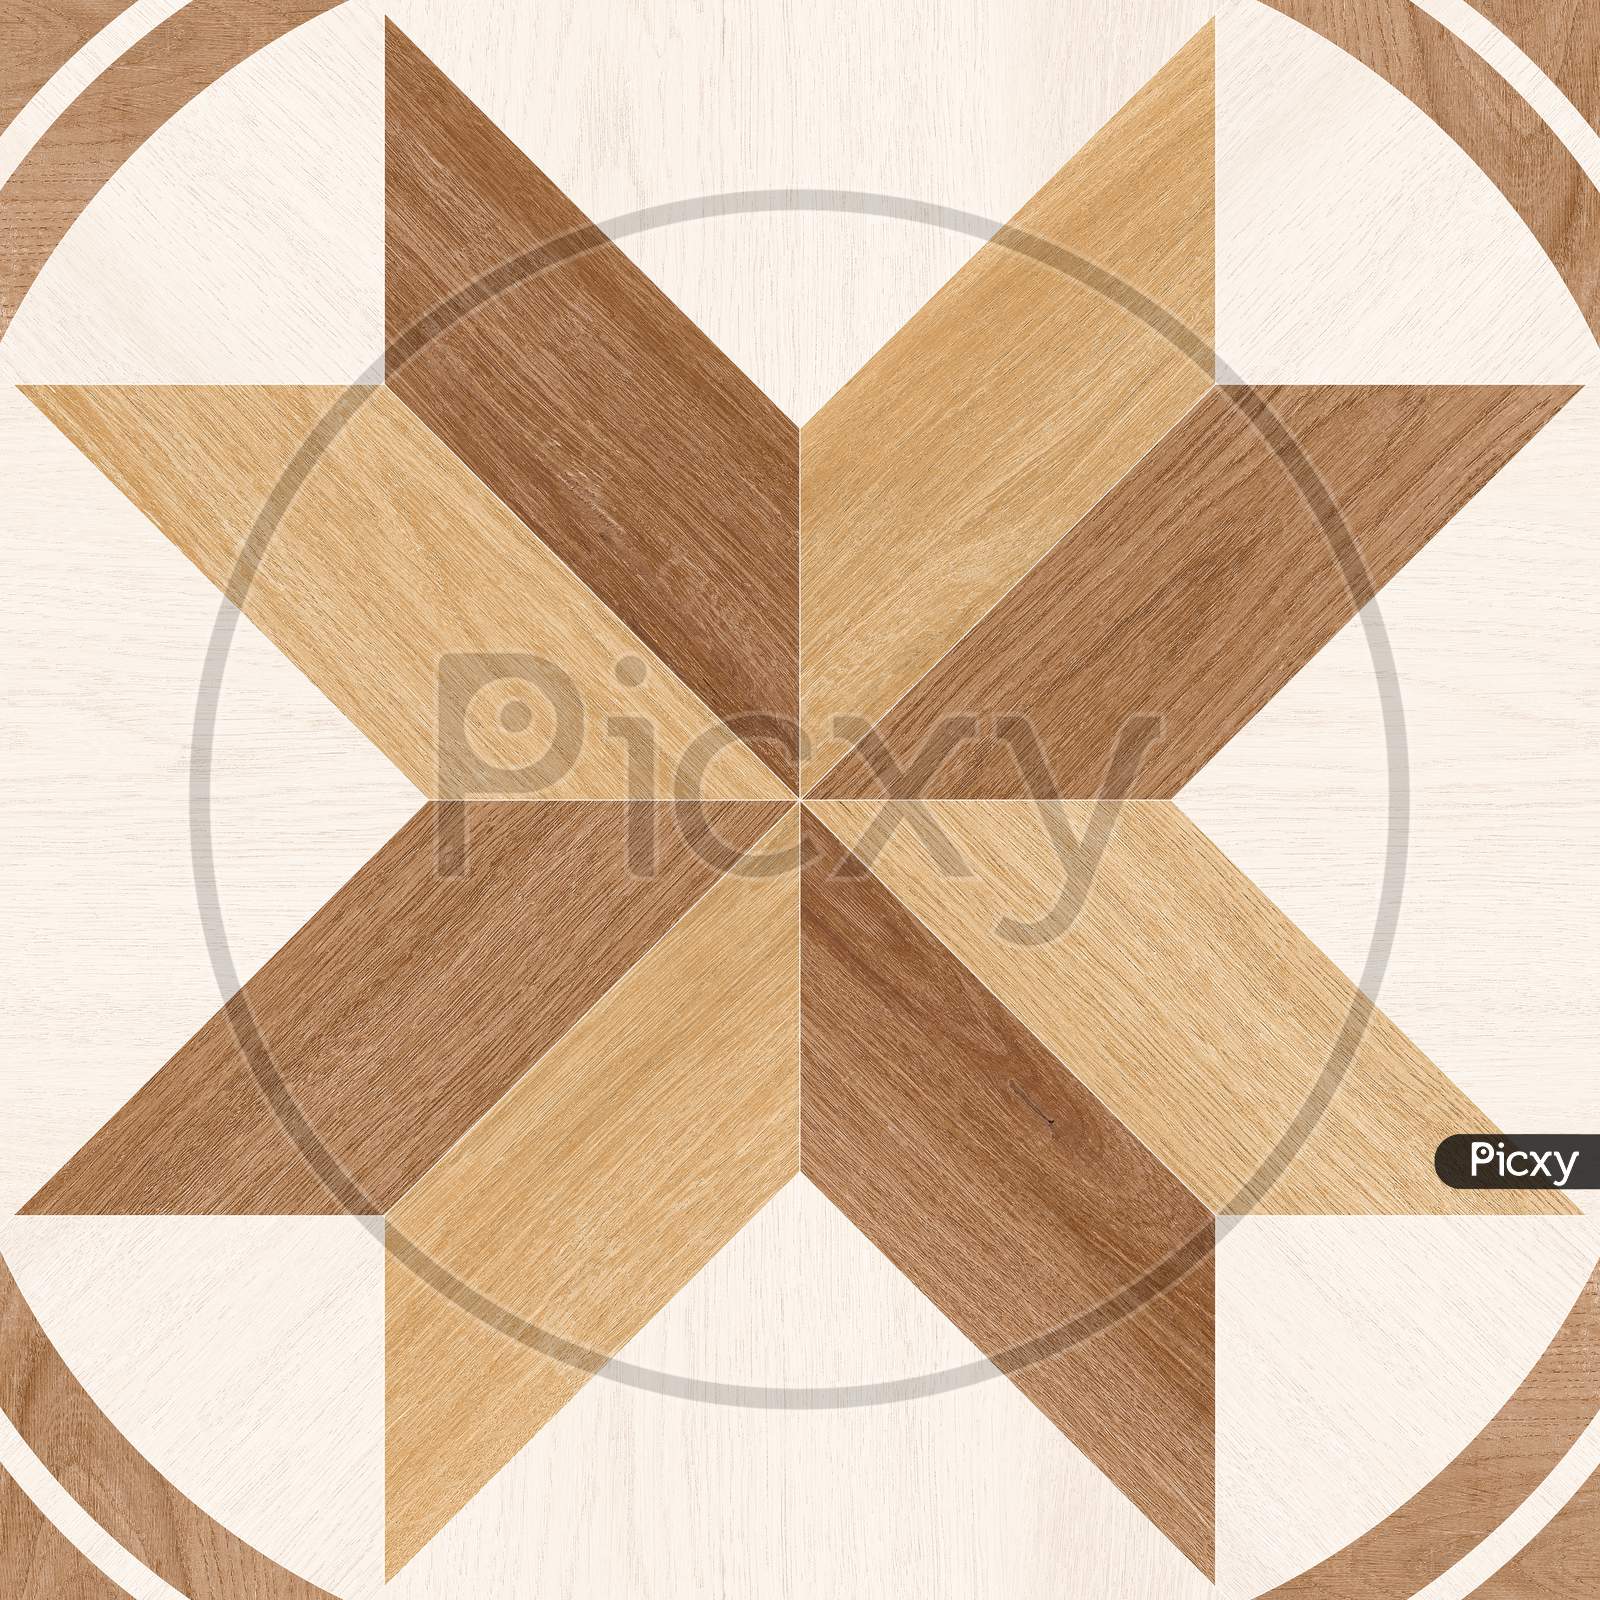 Geometric Star Shapes Pattern Wooden Mosaic Decor Floor And Wall Tile.